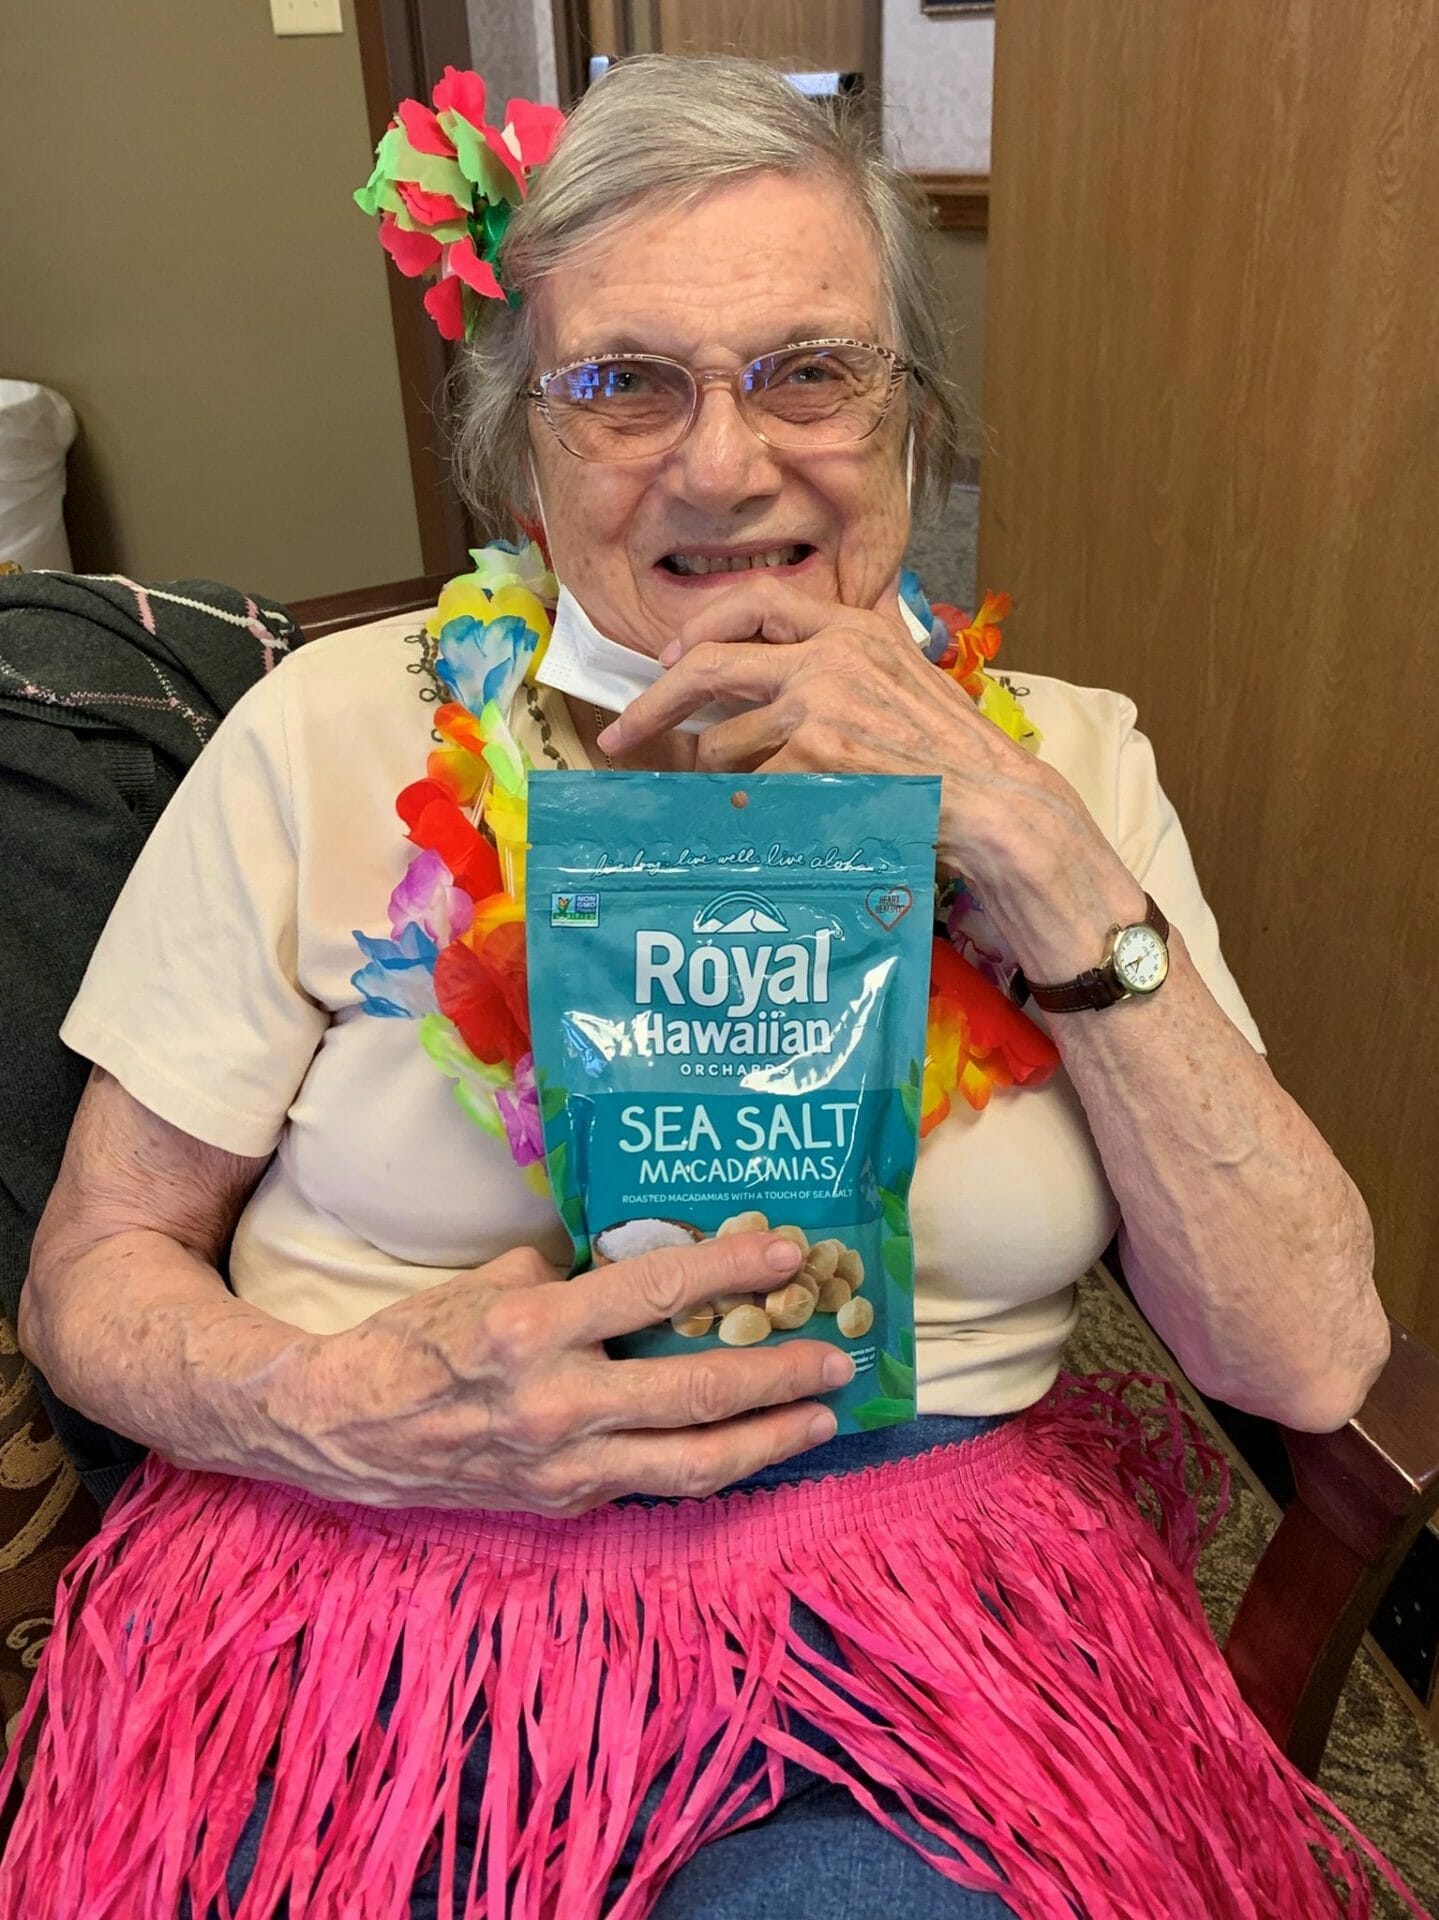 <span  class="uc_style_uc_tiles_grid_image_elementor_uc_items_attribute_title" style="color:#000000;">Smiling resident of American Village Assisted Living Apartments </span>